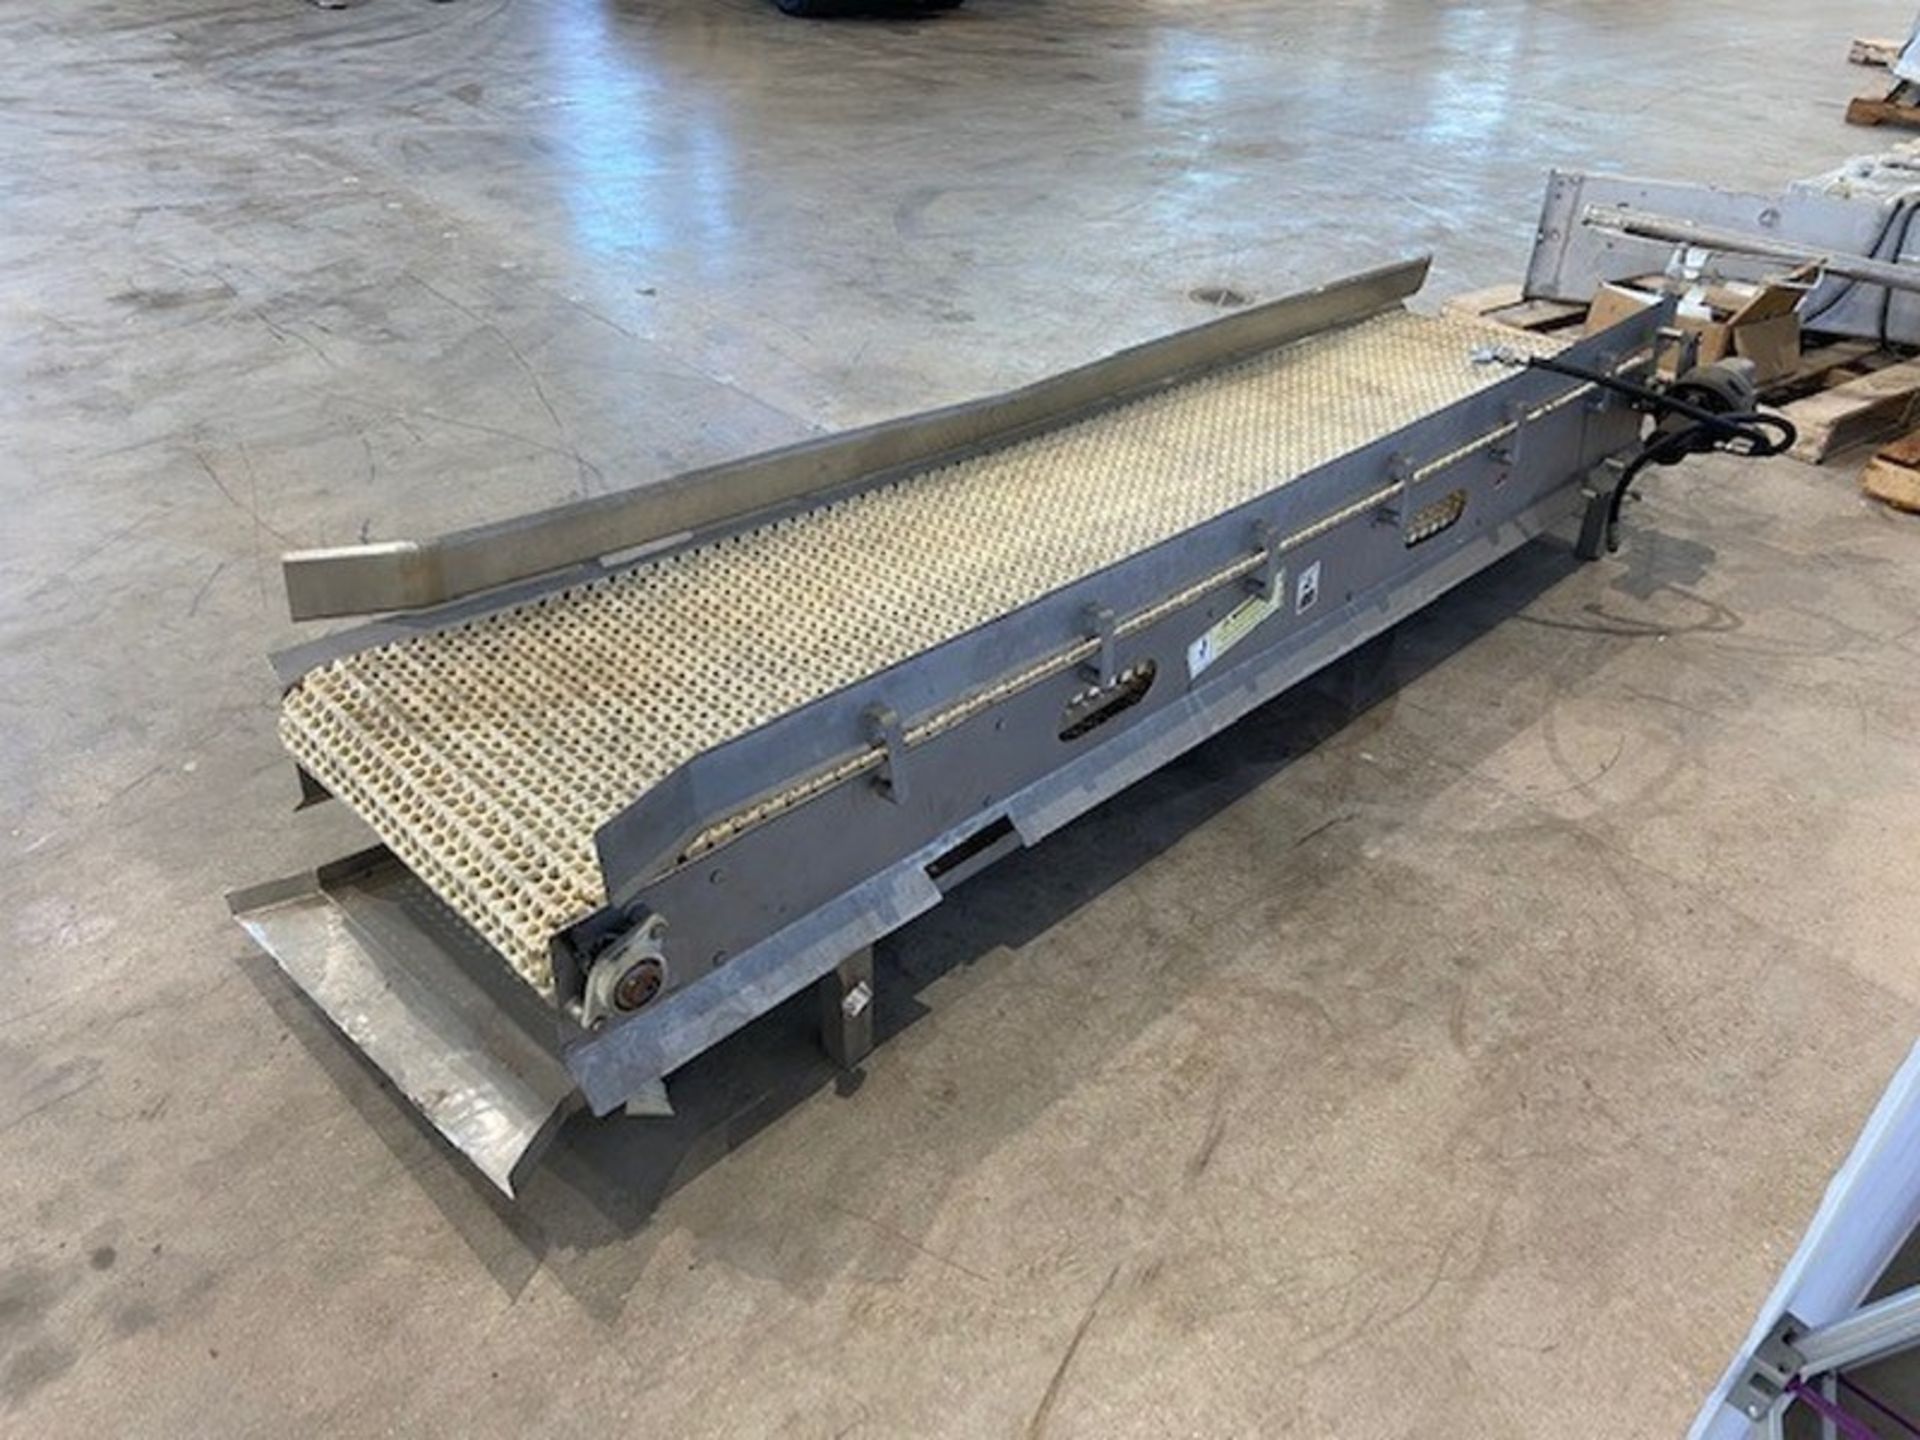 Straight Section of Conveyor,Aprox. 114" L, with Aprox. 24" W Plastic Interlock Belt, - Image 4 of 5